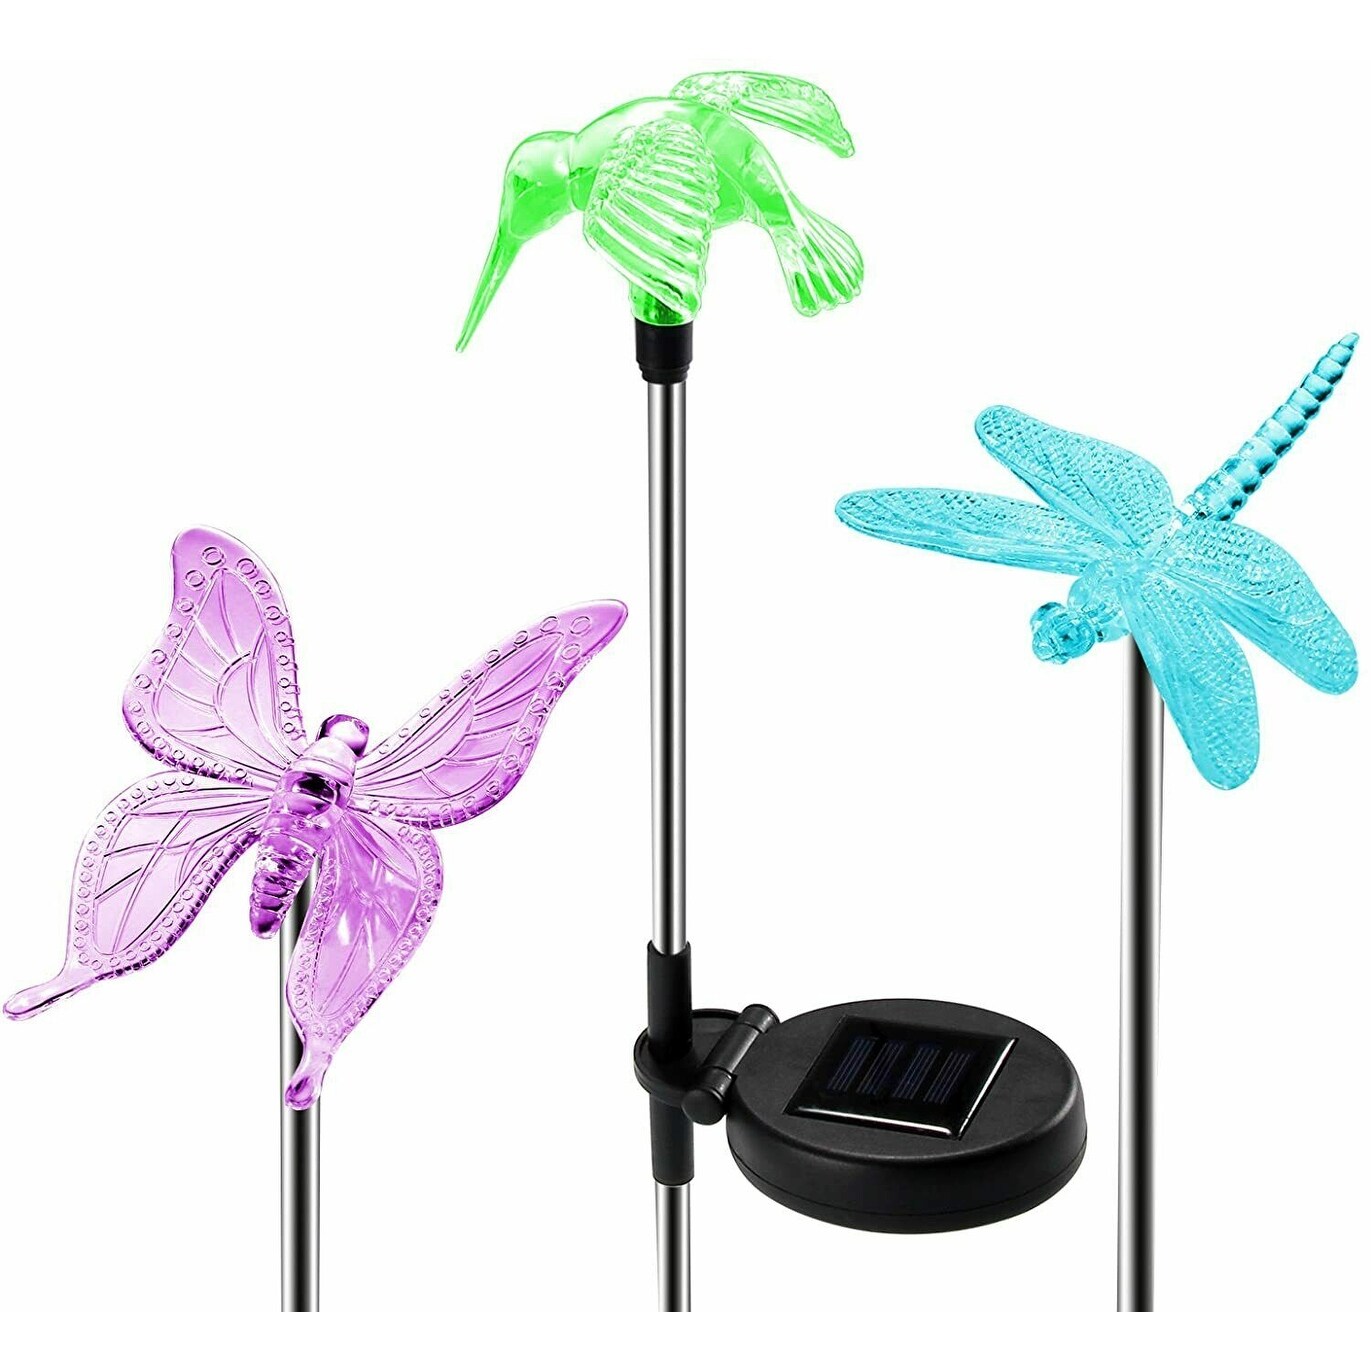 DRAGONFLY NEW Free Ship! BUTTERFLY or FLOWER 10 Mini LED String Lights 